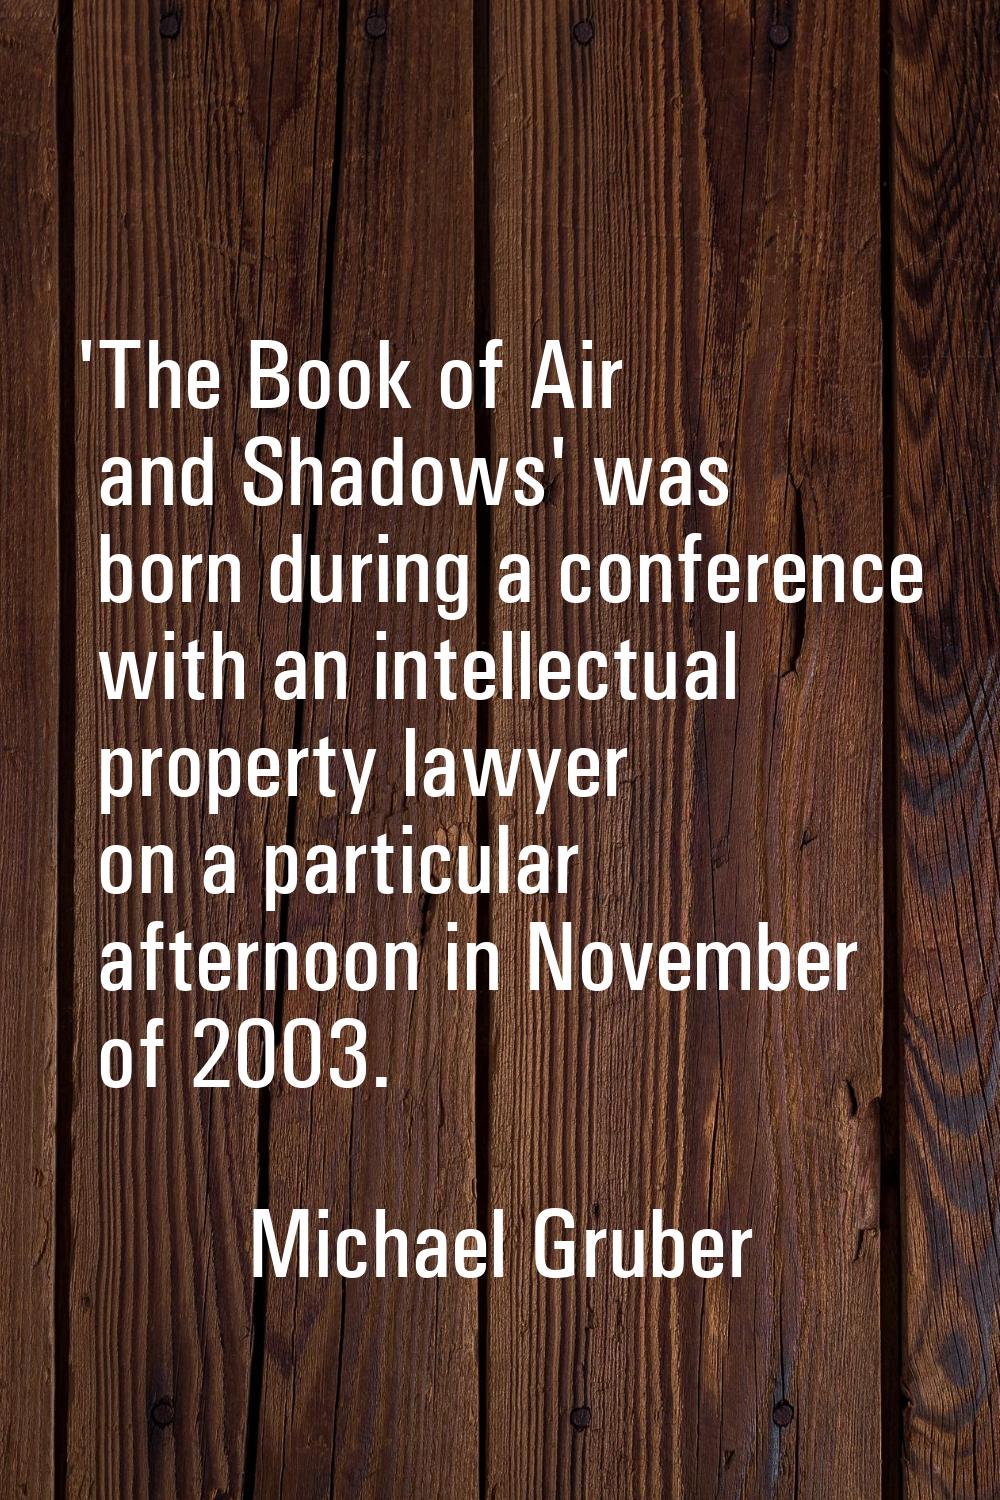 'The Book of Air and Shadows' was born during a conference with an intellectual property lawyer on 